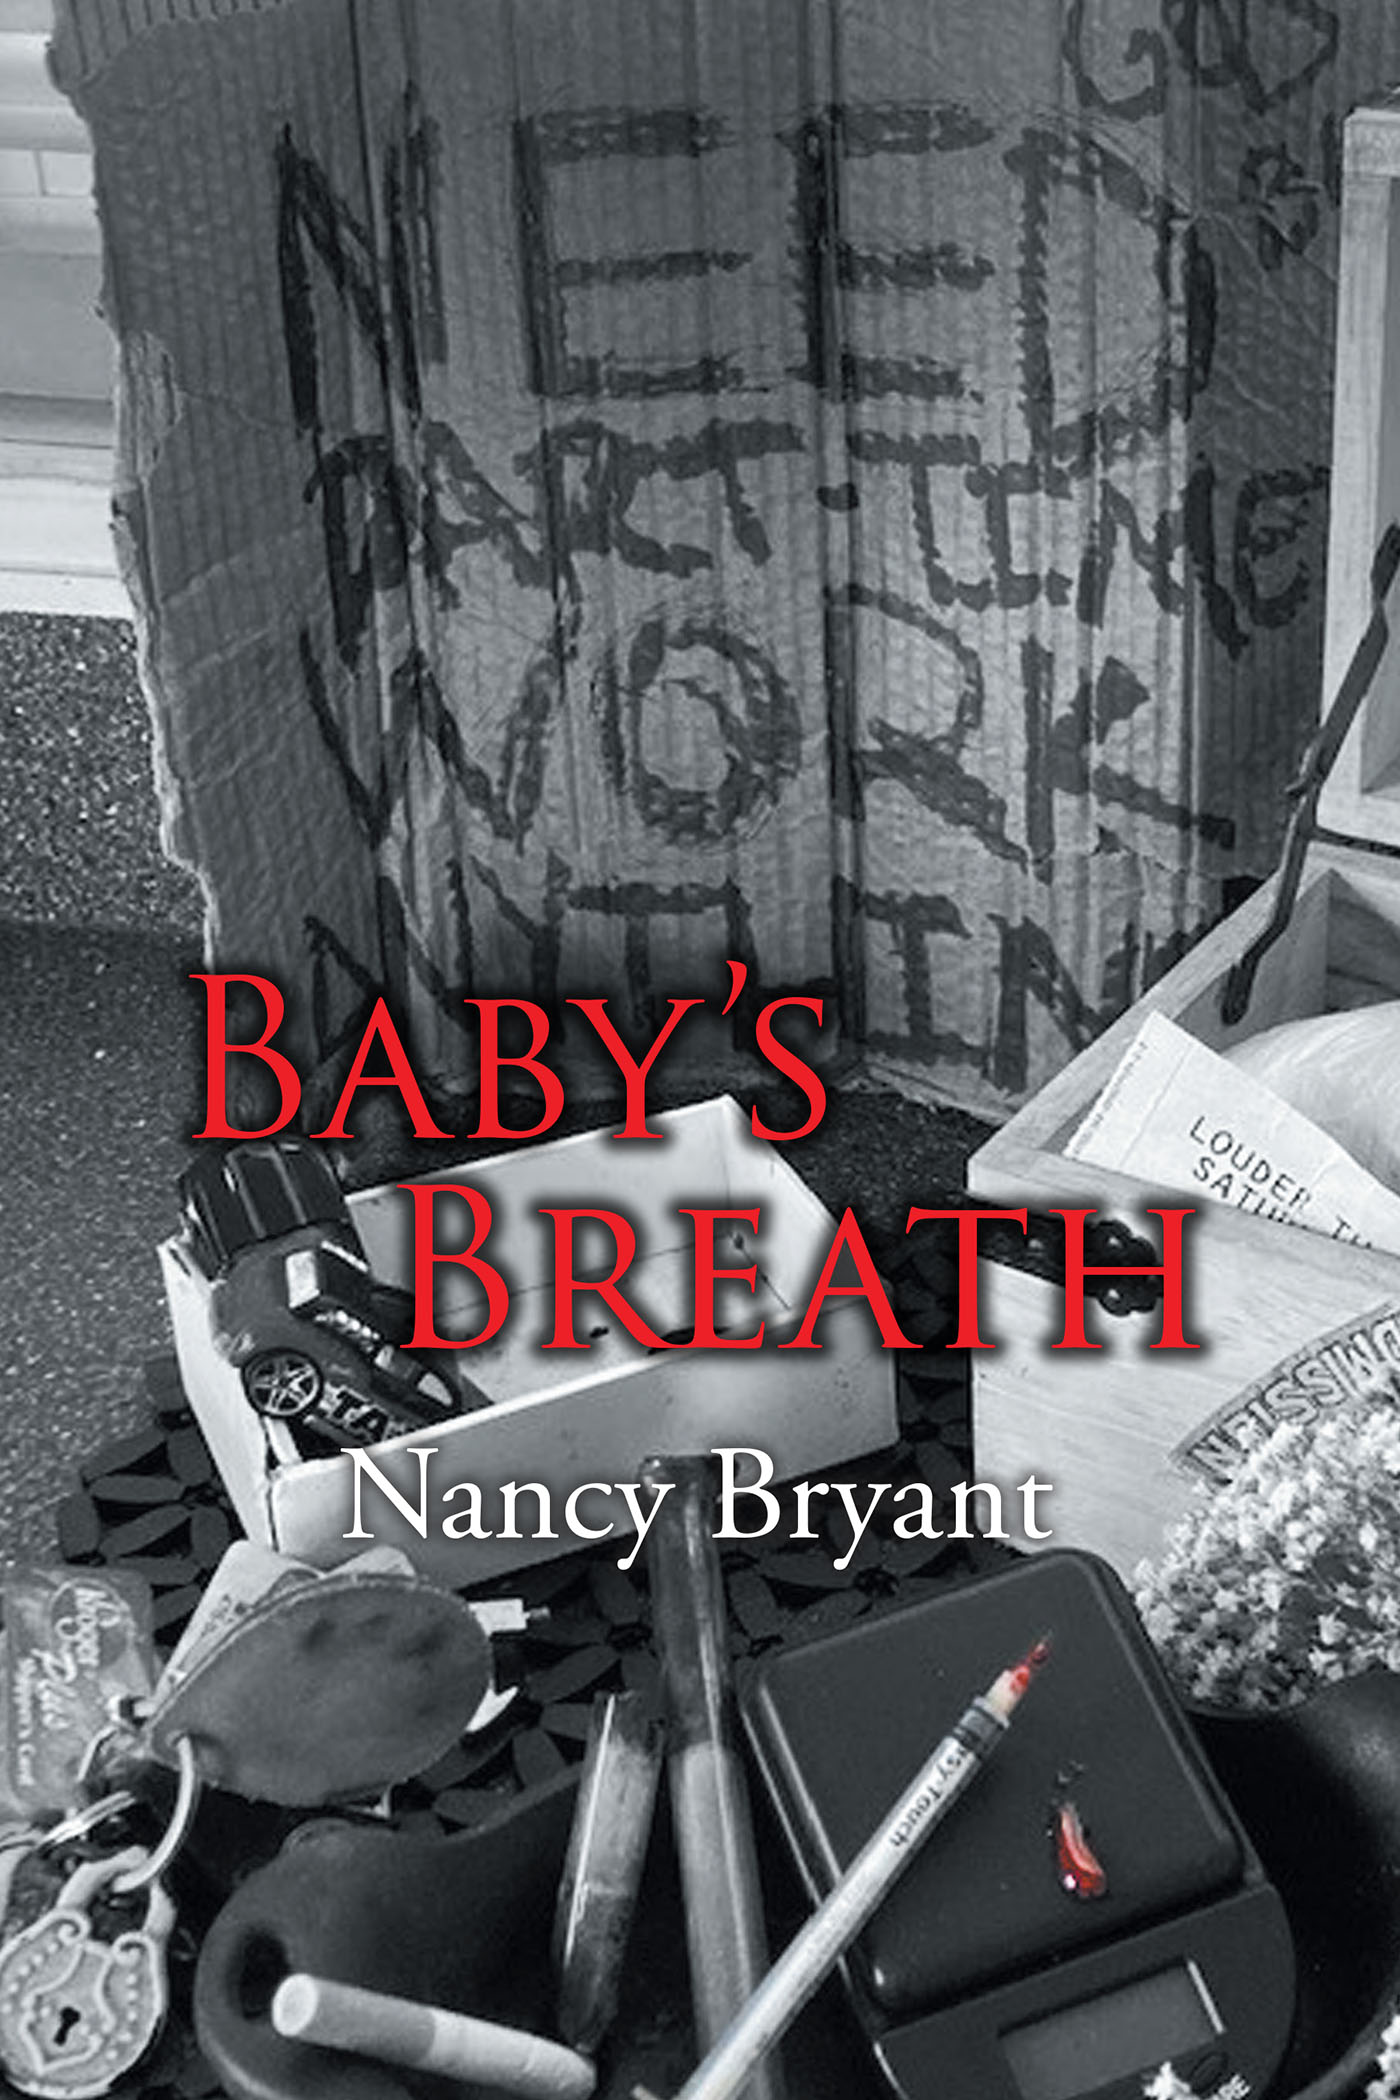 Author Nancy Bryant’s New Book, "Baby’s Breath," Explores Bias and How Everyone’s Human Nature Plays Out from One Person to the Next